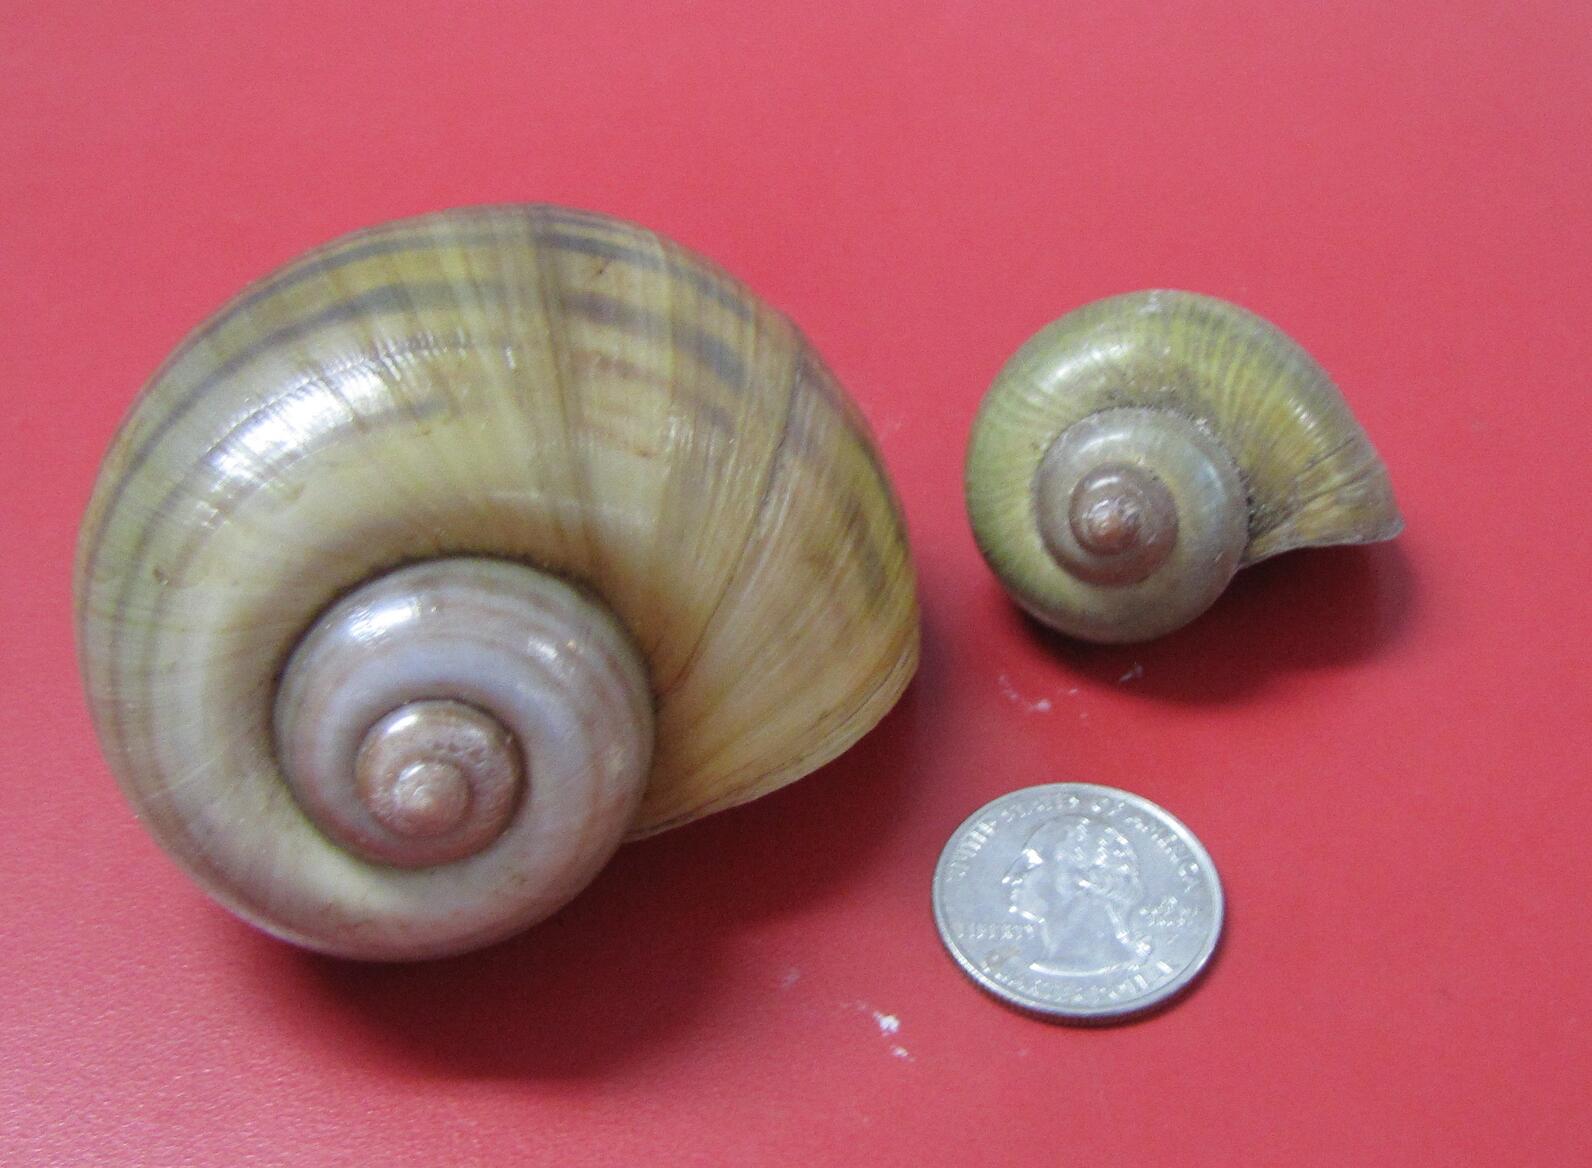 A large exotic snail shell next to a smaller native snail shell, with a quarter for comparison. The smaller native shell is similar in size to the quarter.